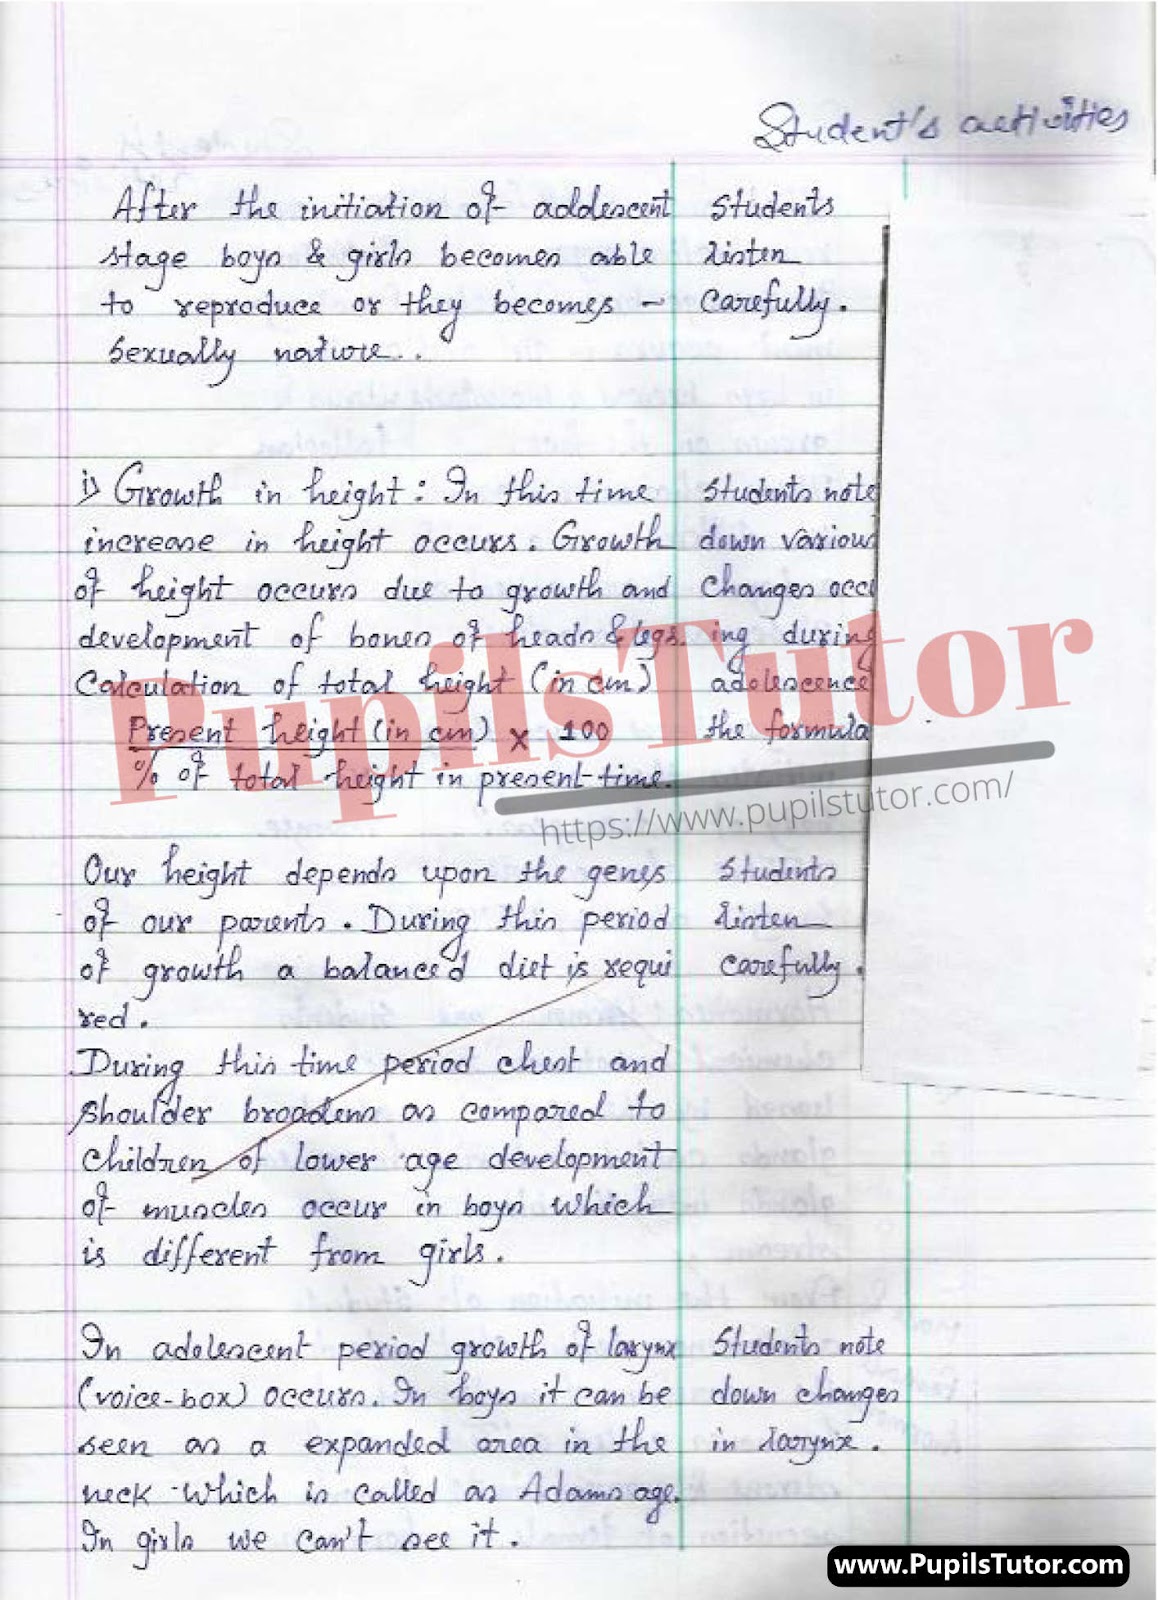 Class/Grade 8 Life Science Lesson Plan On Adolescence Period For CBSE NCERT KVS School And University College Teachers – (Page And Image Number 3) – www.pupilstutor.com